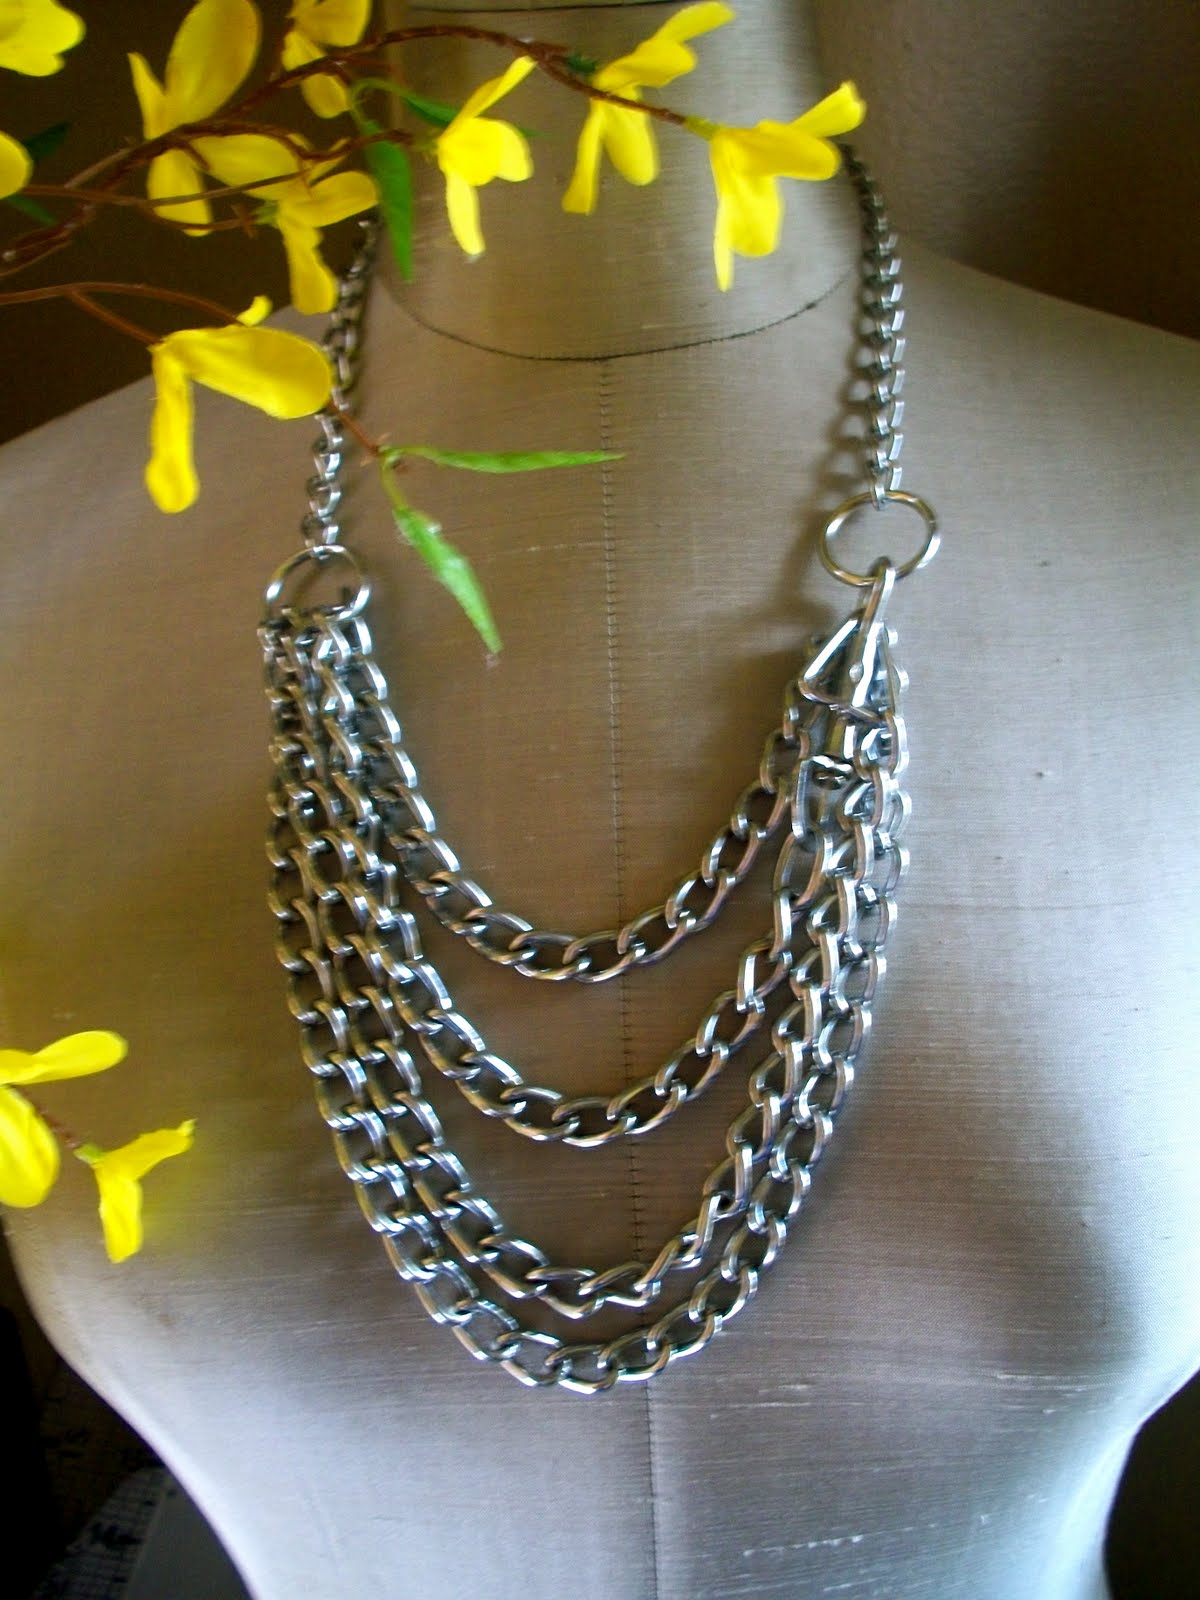 THE SISTERS BLOG: The Dog Chain necklace tutorial